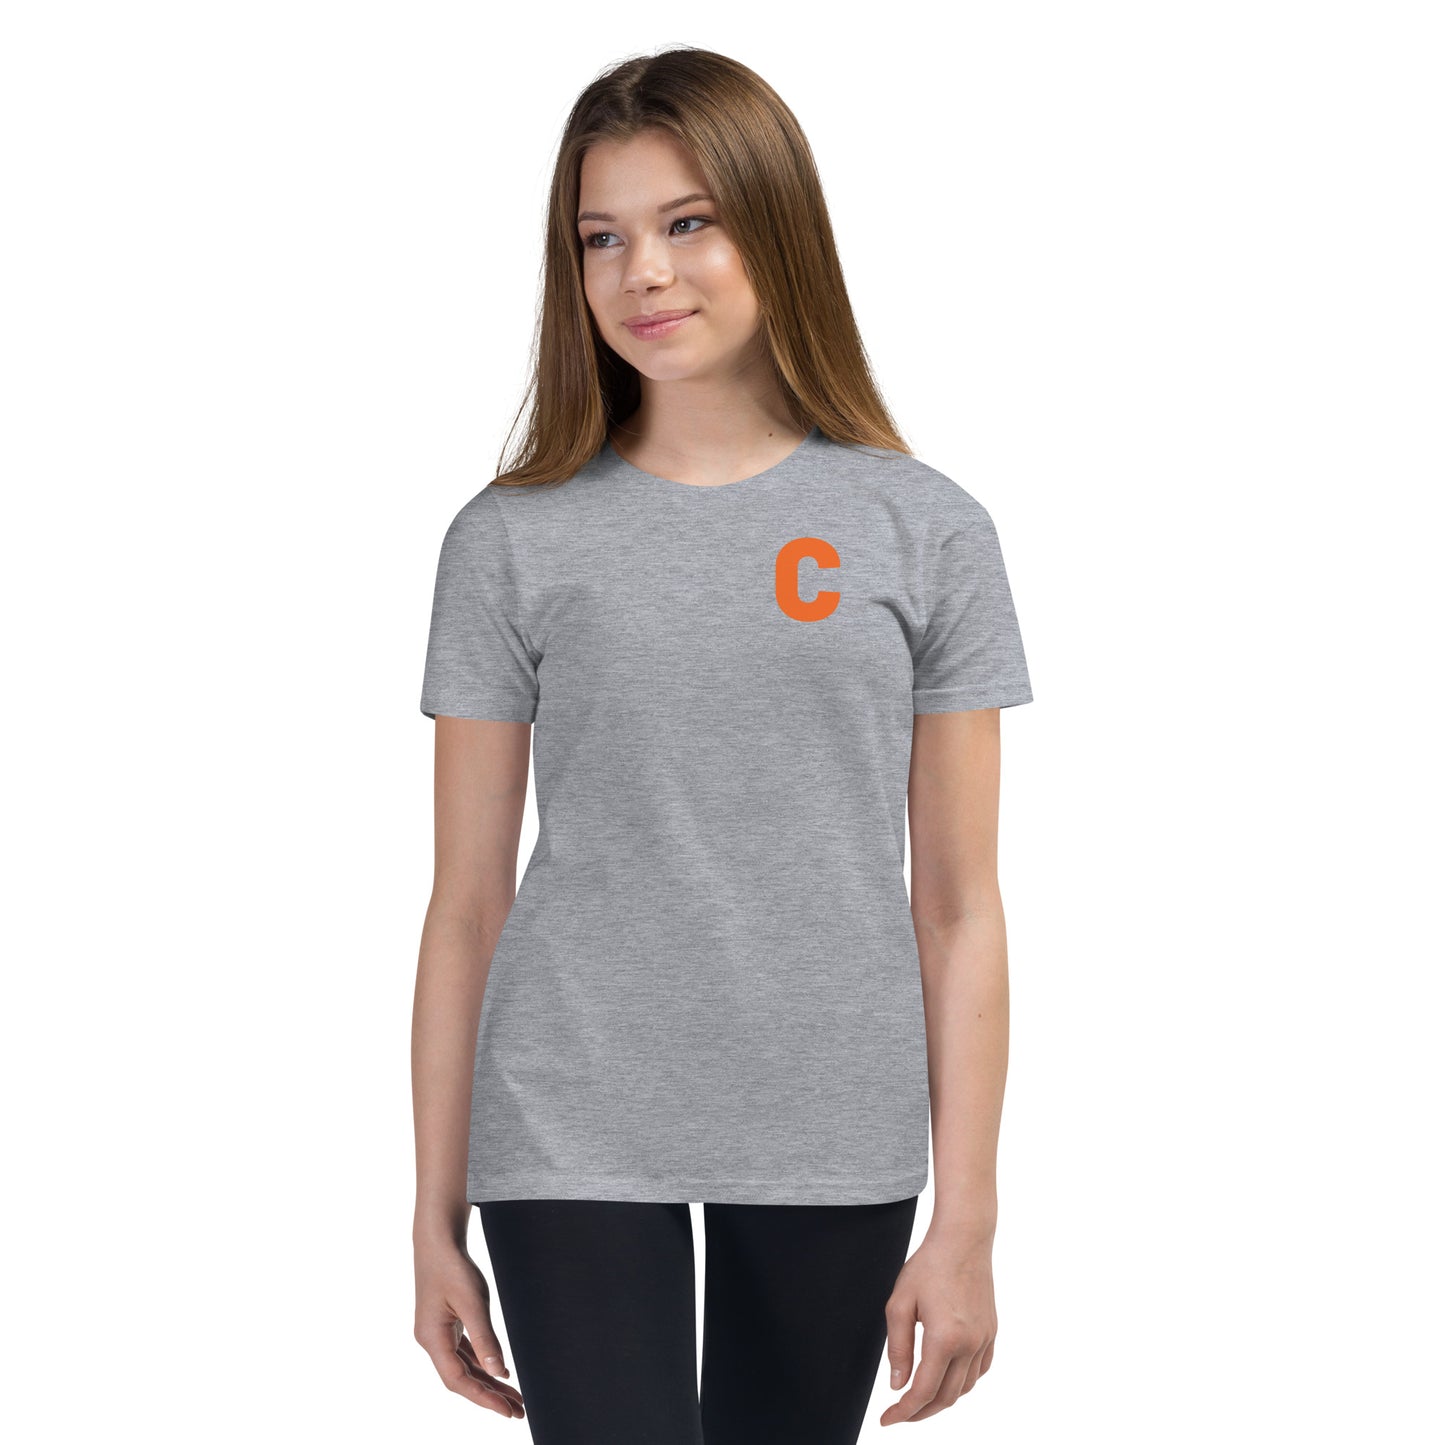 A Day at Shea "C" Youth Unisex T-Shirt